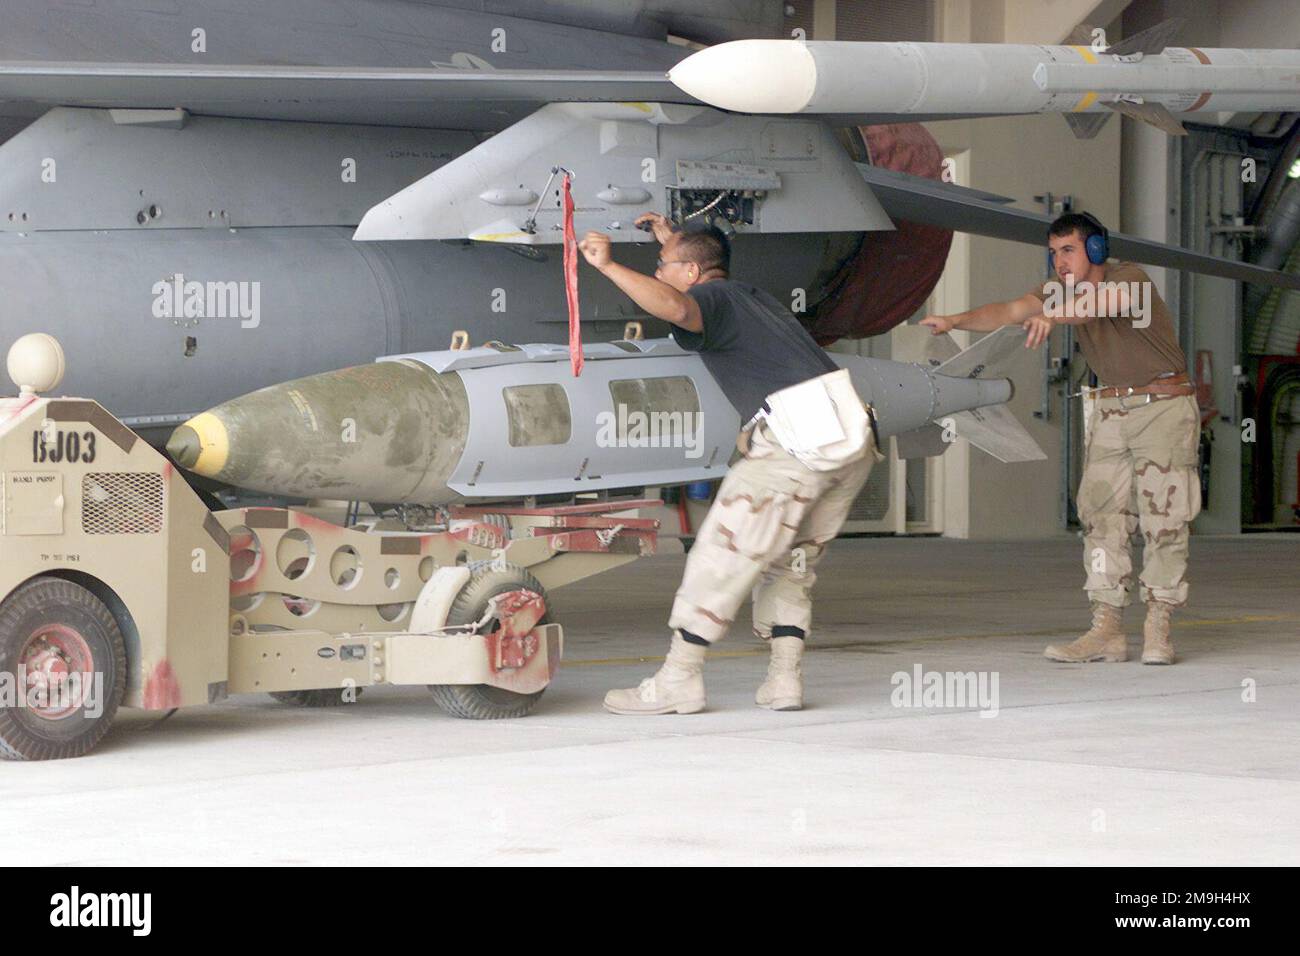 A Munitions SPECIALIST (MS), STAFF Sergeant (SSGT) Blechinger 'Krin' Kriangsak (left) and AIRMAN First Class (A1C) Christopher Caruso, load a Mark-84 bomb onto the weapons rack of an F-16 Fighting Falcon assigned to the 366 Air Expeditionary Group (AEG), deployed in support of Operation ENDURING FREEDOM. Subject Operation/Series: ENDURING FREEDOM Country: Unknown Scene Major Command Shown: CENTCOM Stock Photo